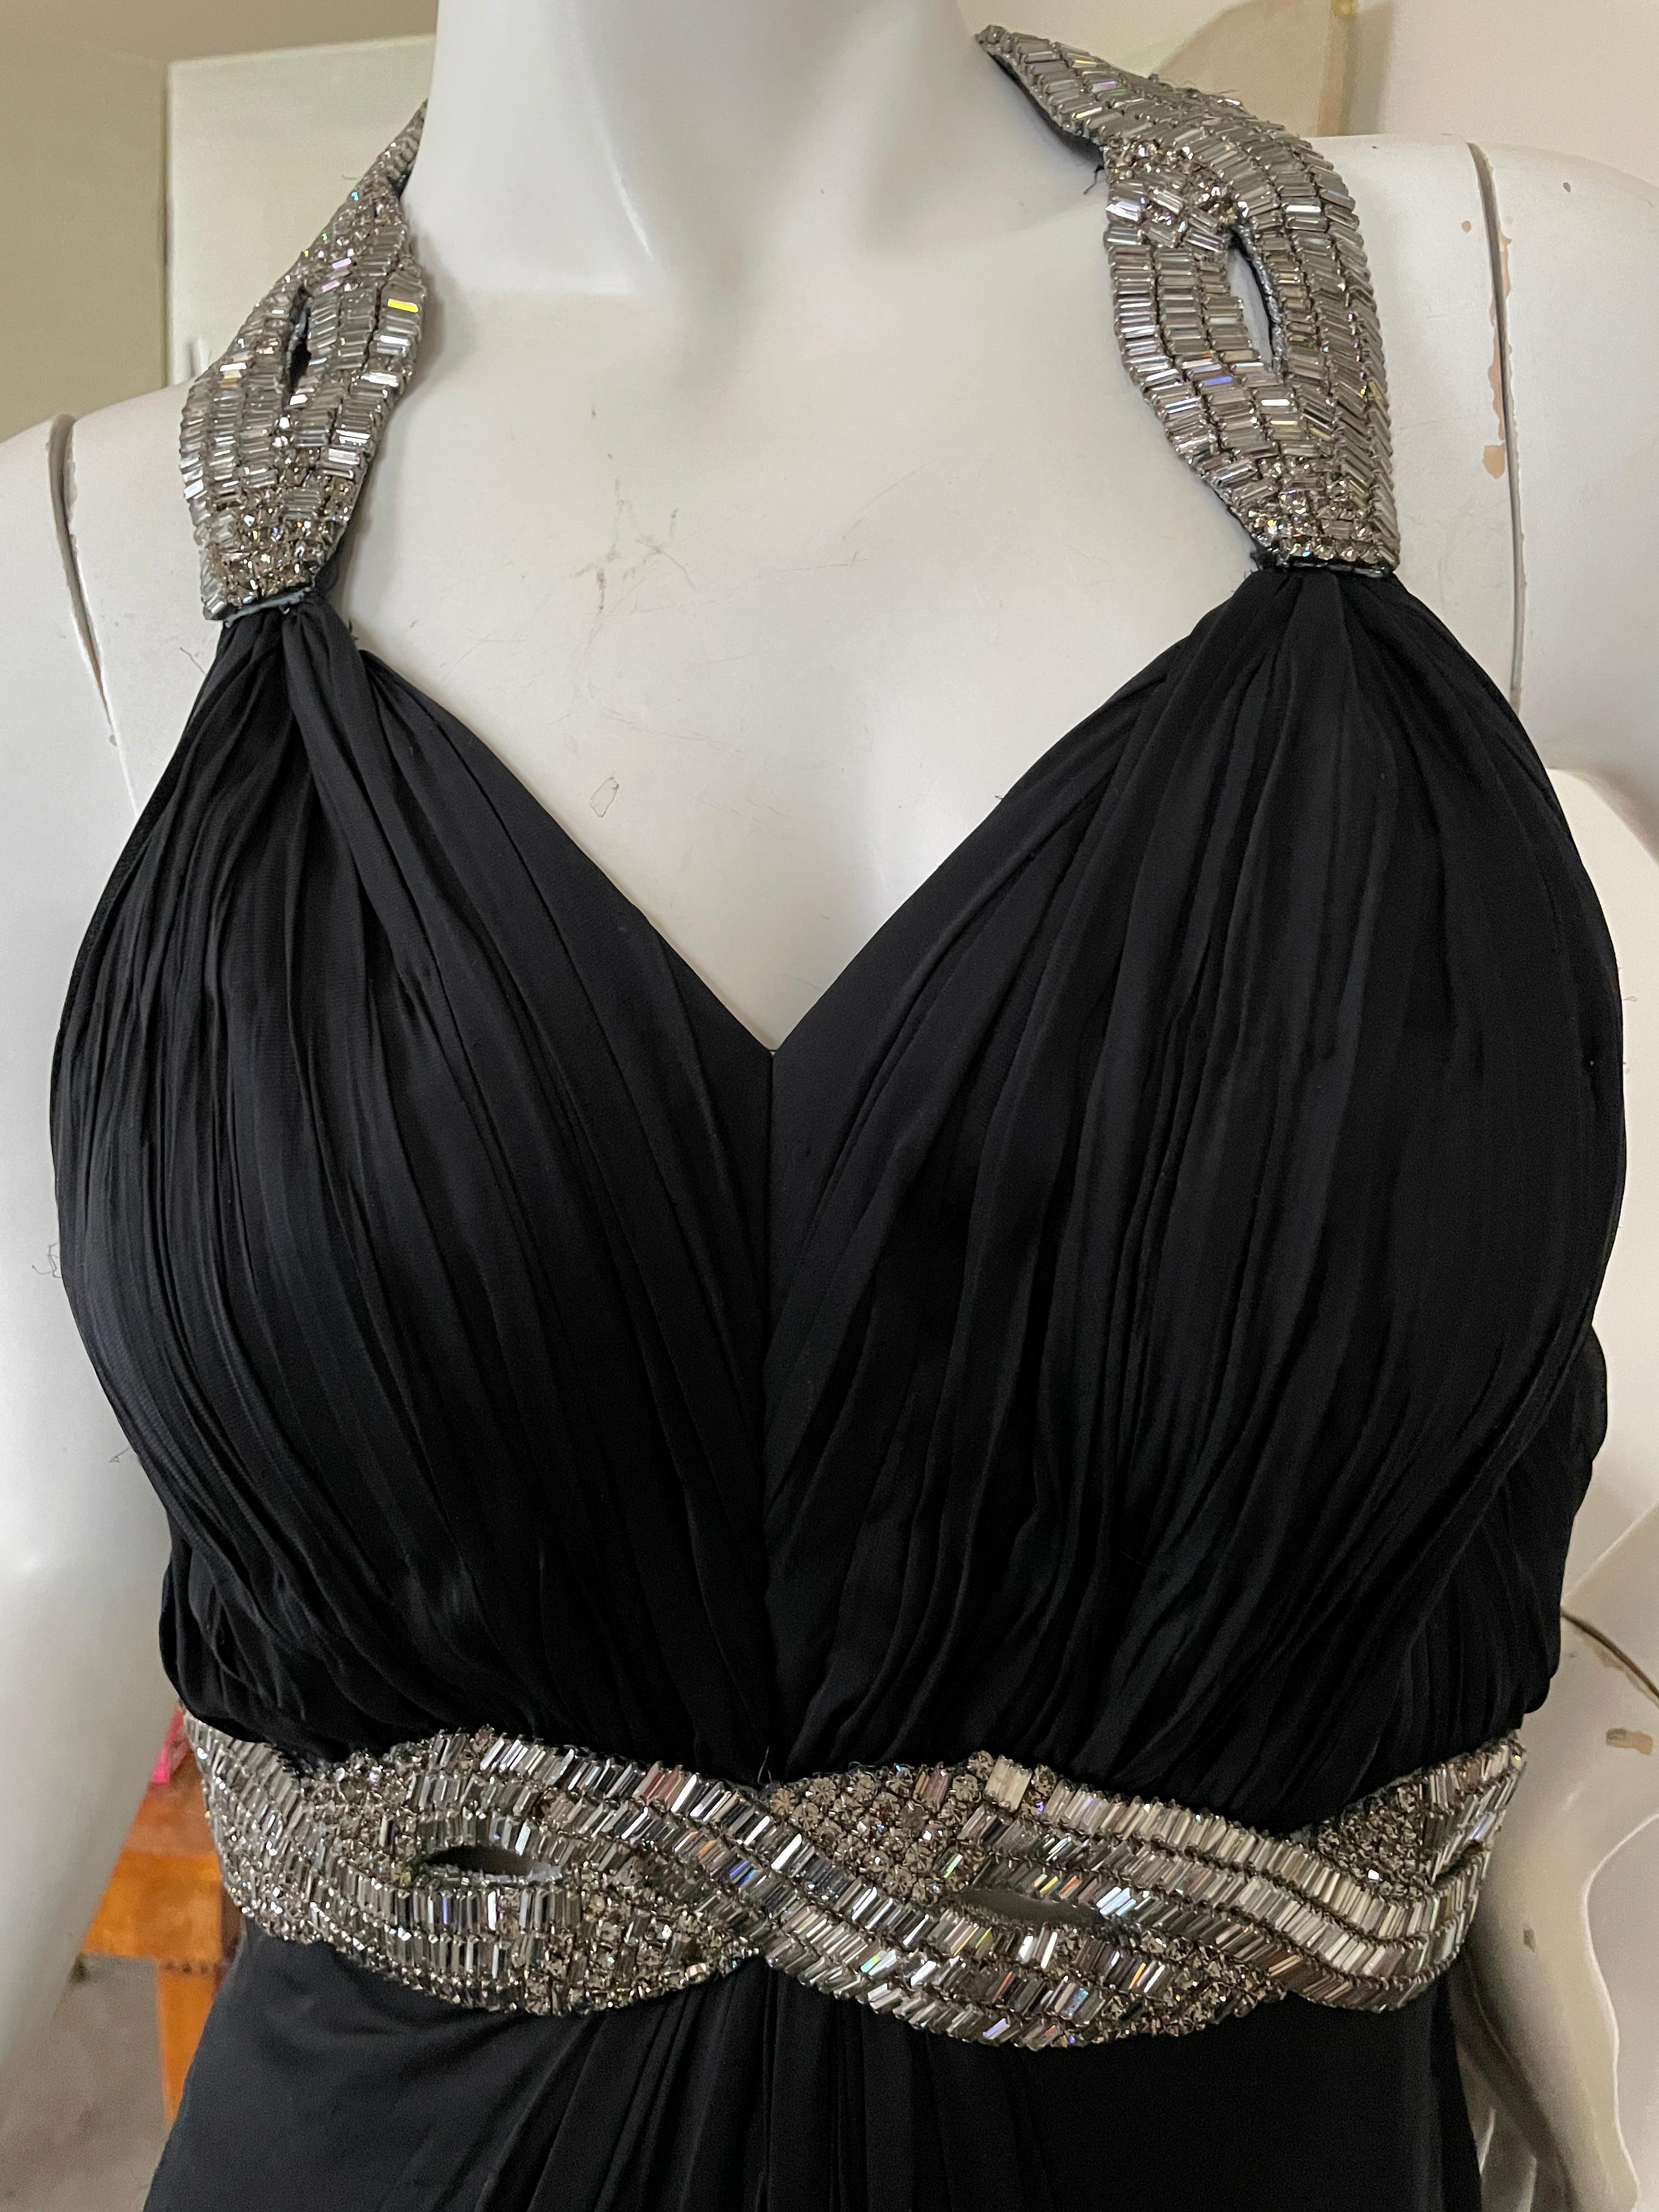  Roberto Cavalli Vintage Black Dress with Extravagant Crystal Baguette Ornaments In Good Condition For Sale In Cloverdale, CA